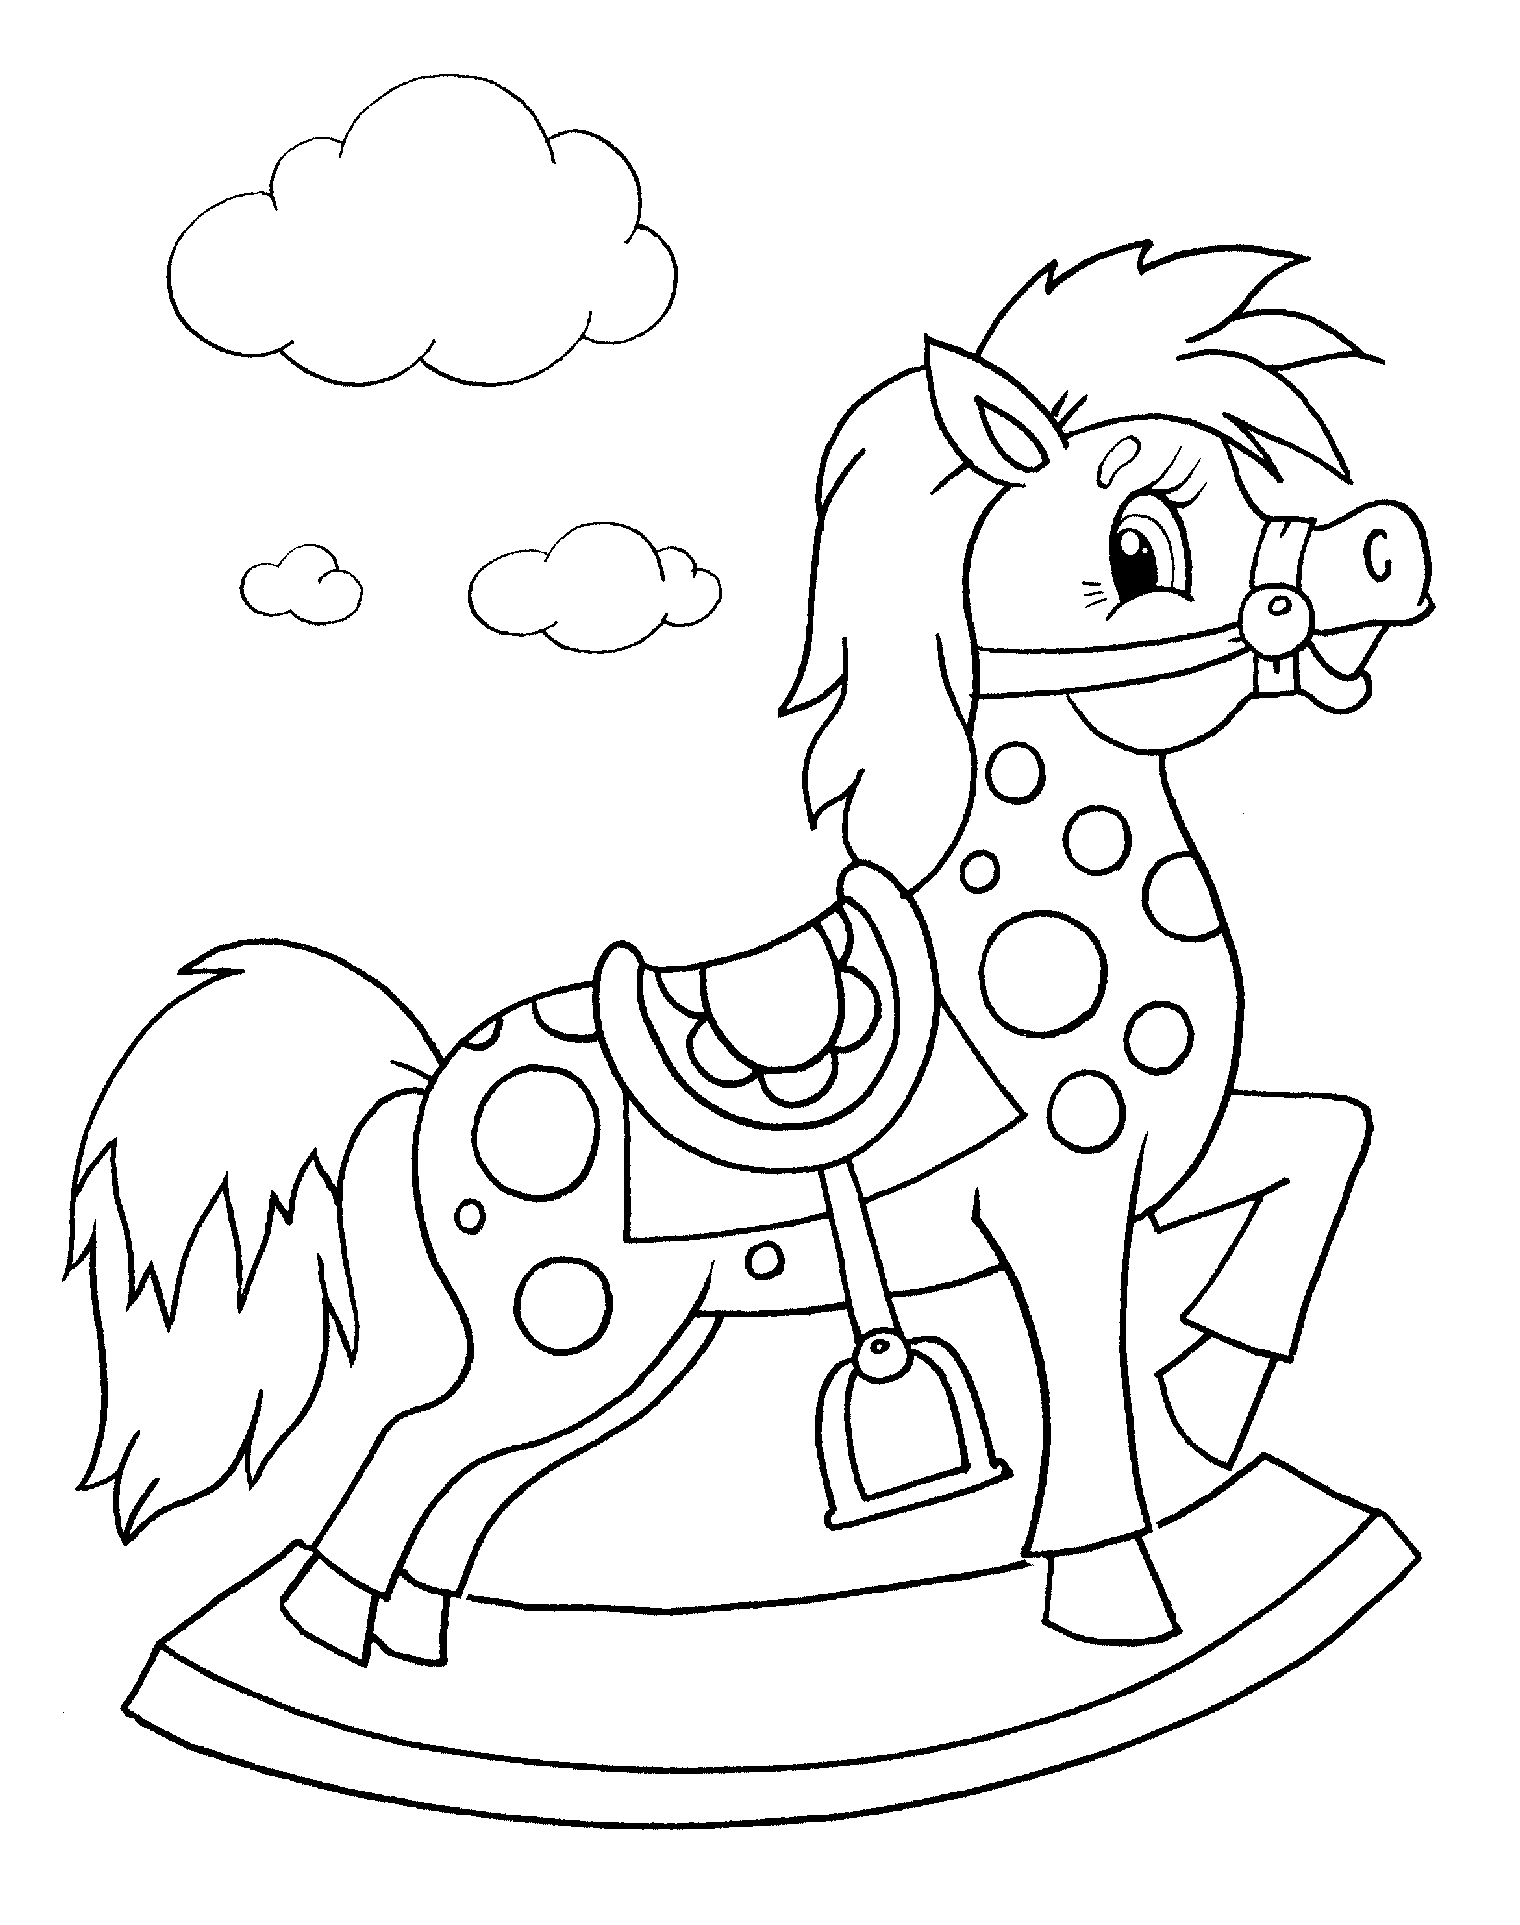 Coloring pages for children of 45 years to download and